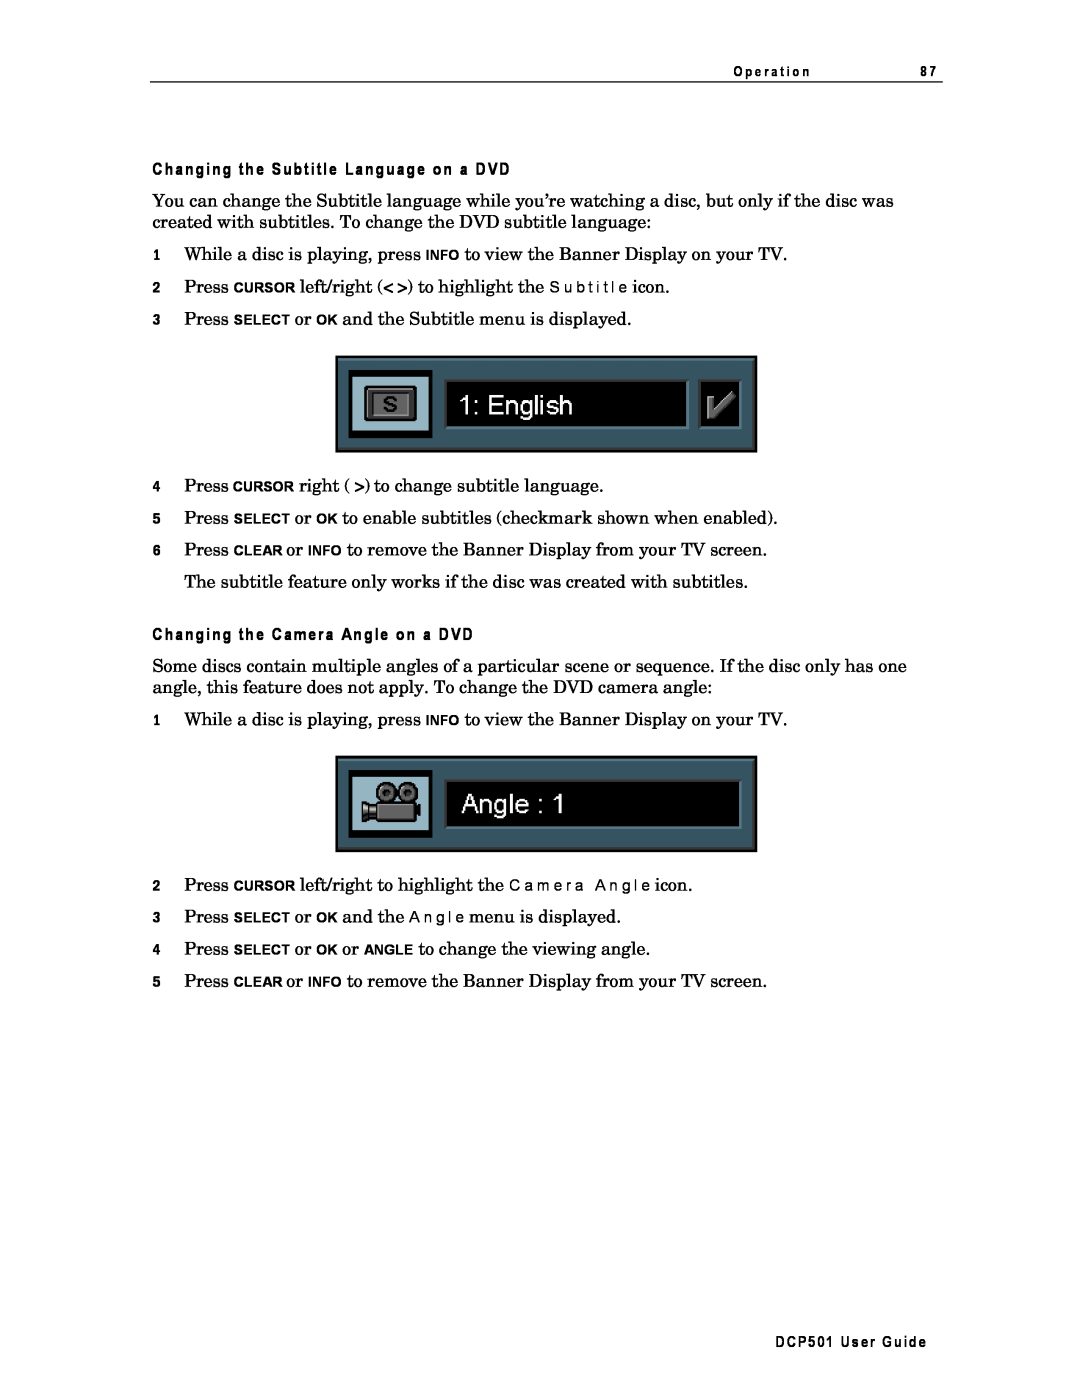 Motorola DCP501 manual Changing the Subtitle Language on a DVD, Changing the Camera Angle on a DVD 